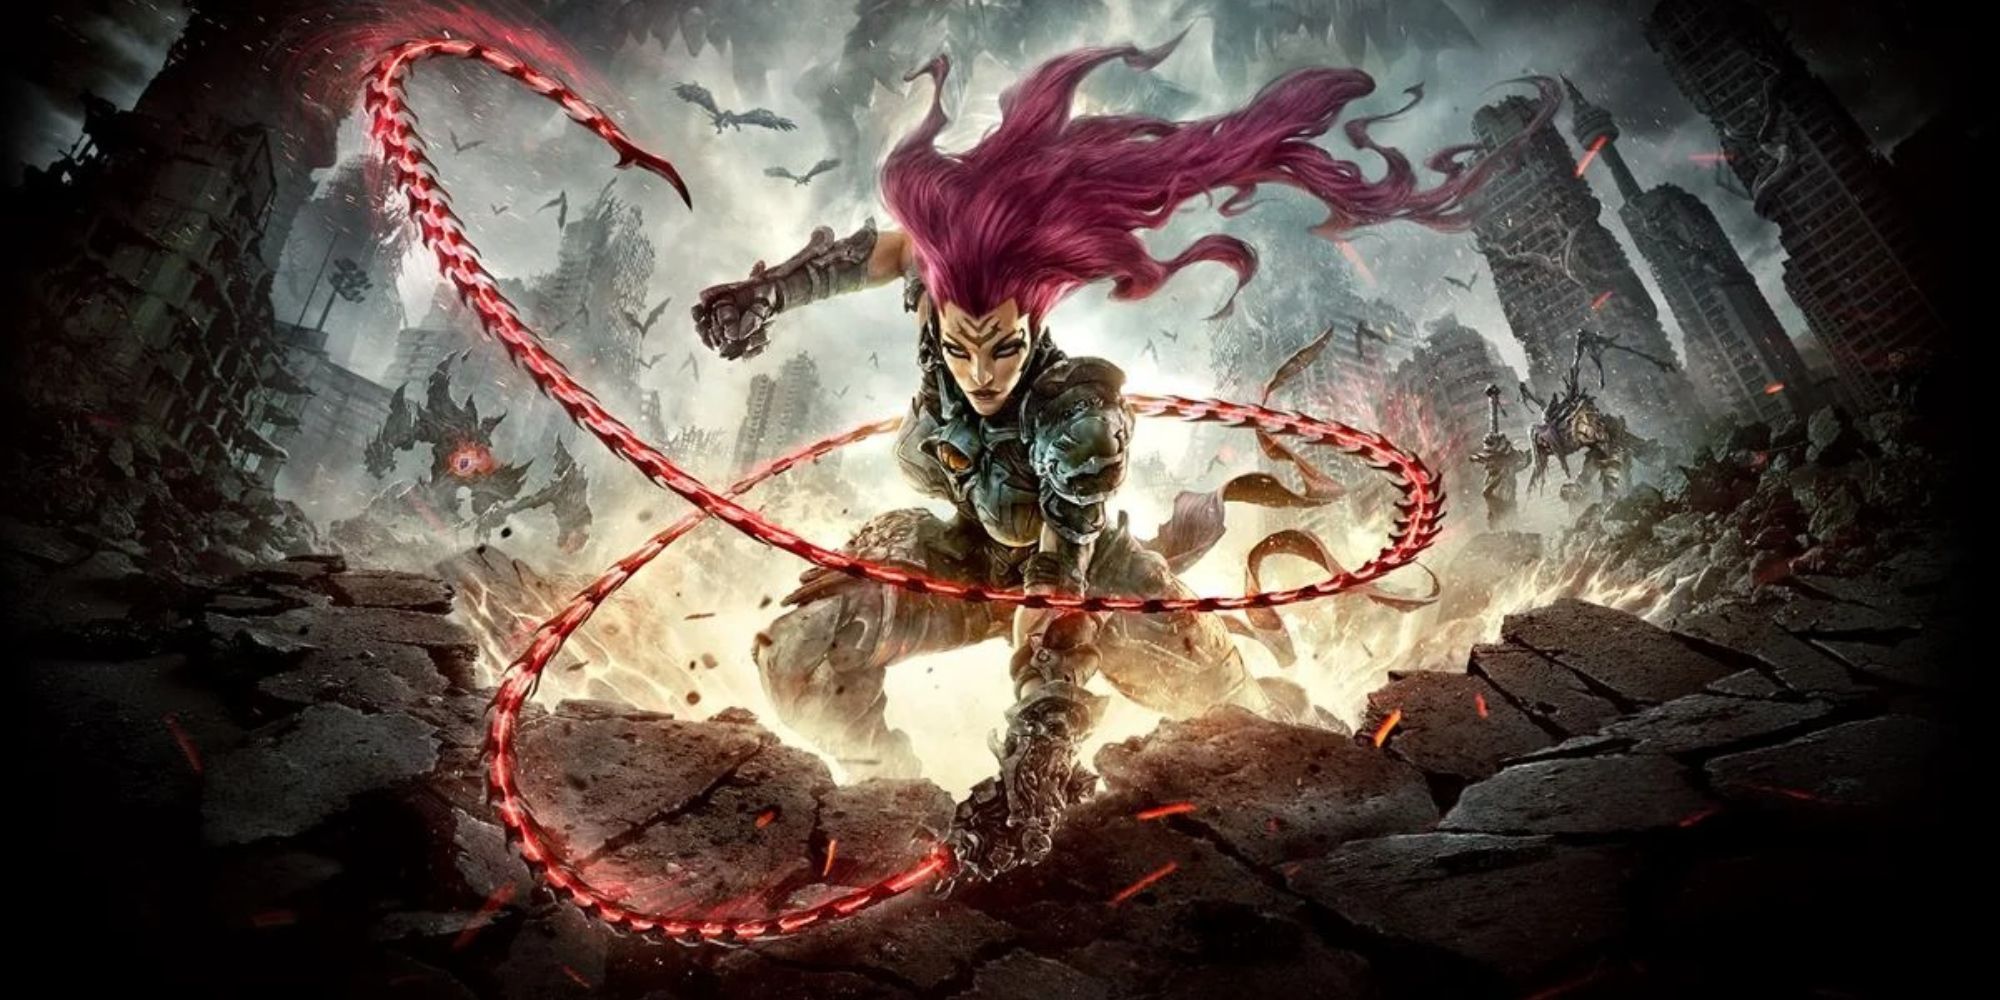 Darksiders 3 Artwork of Fury with chain weapon